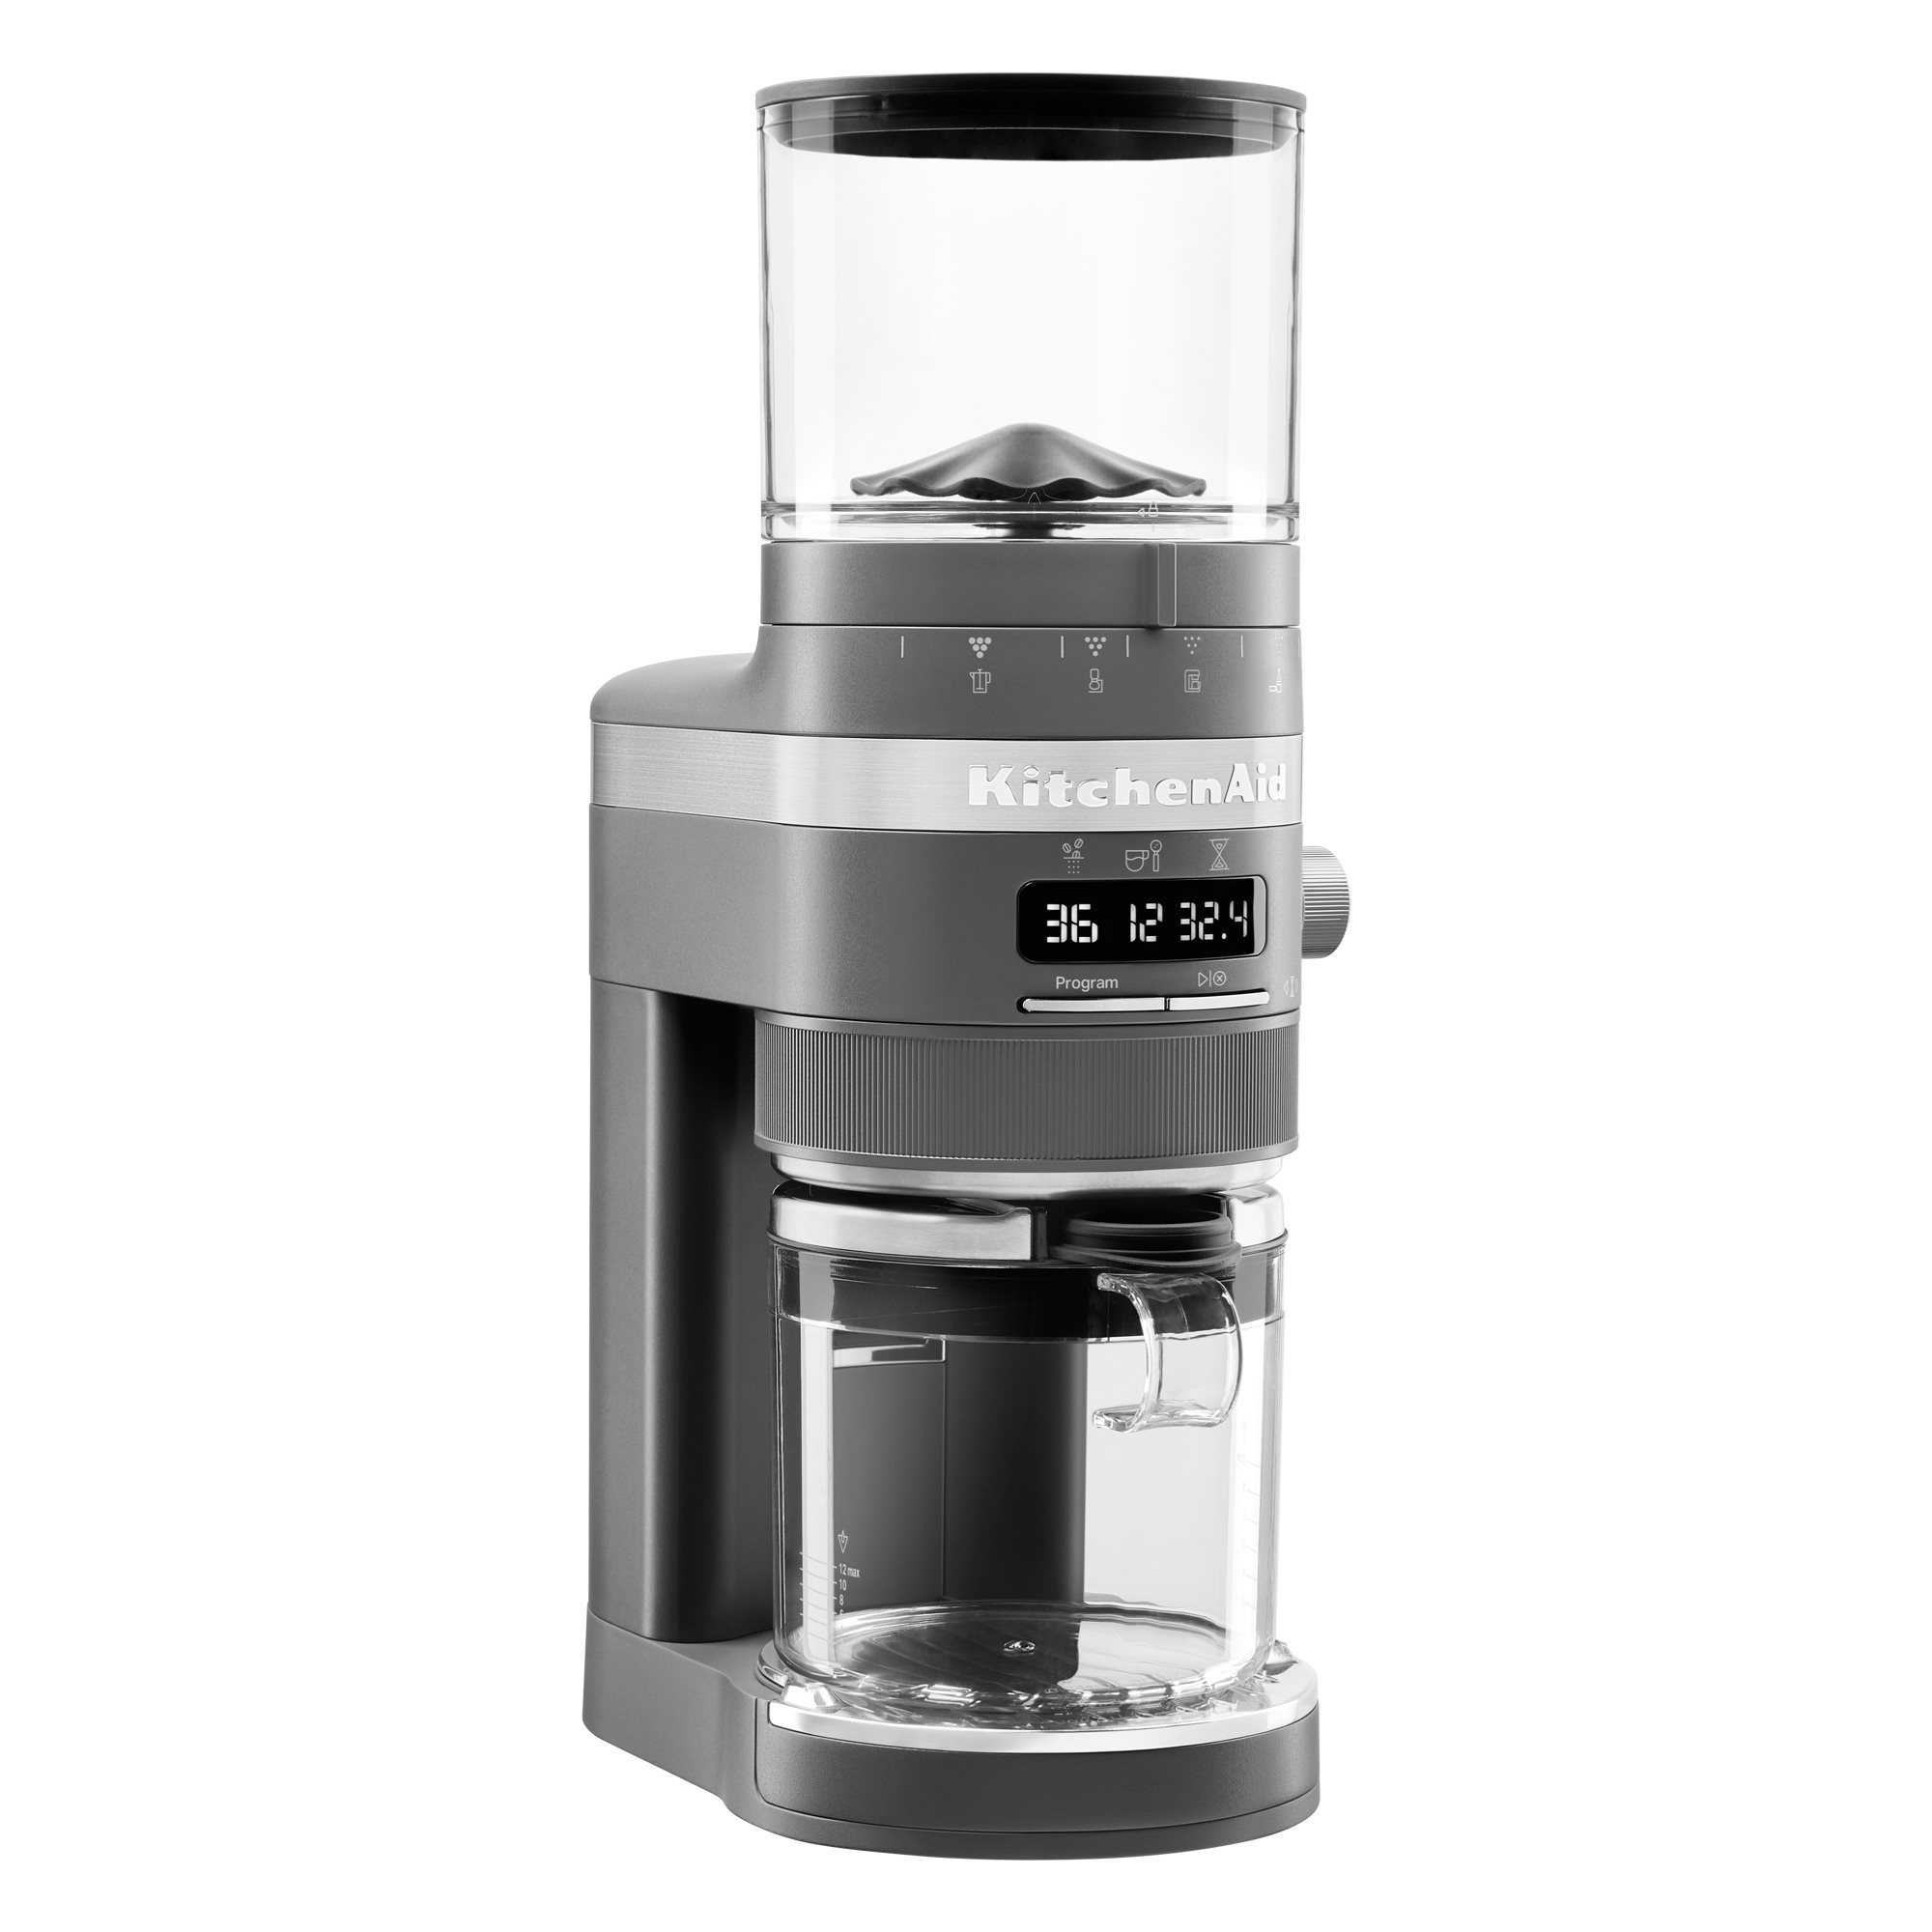 Artisan electric coffee grinder, Charcoal Gray color - KitchenAid brand